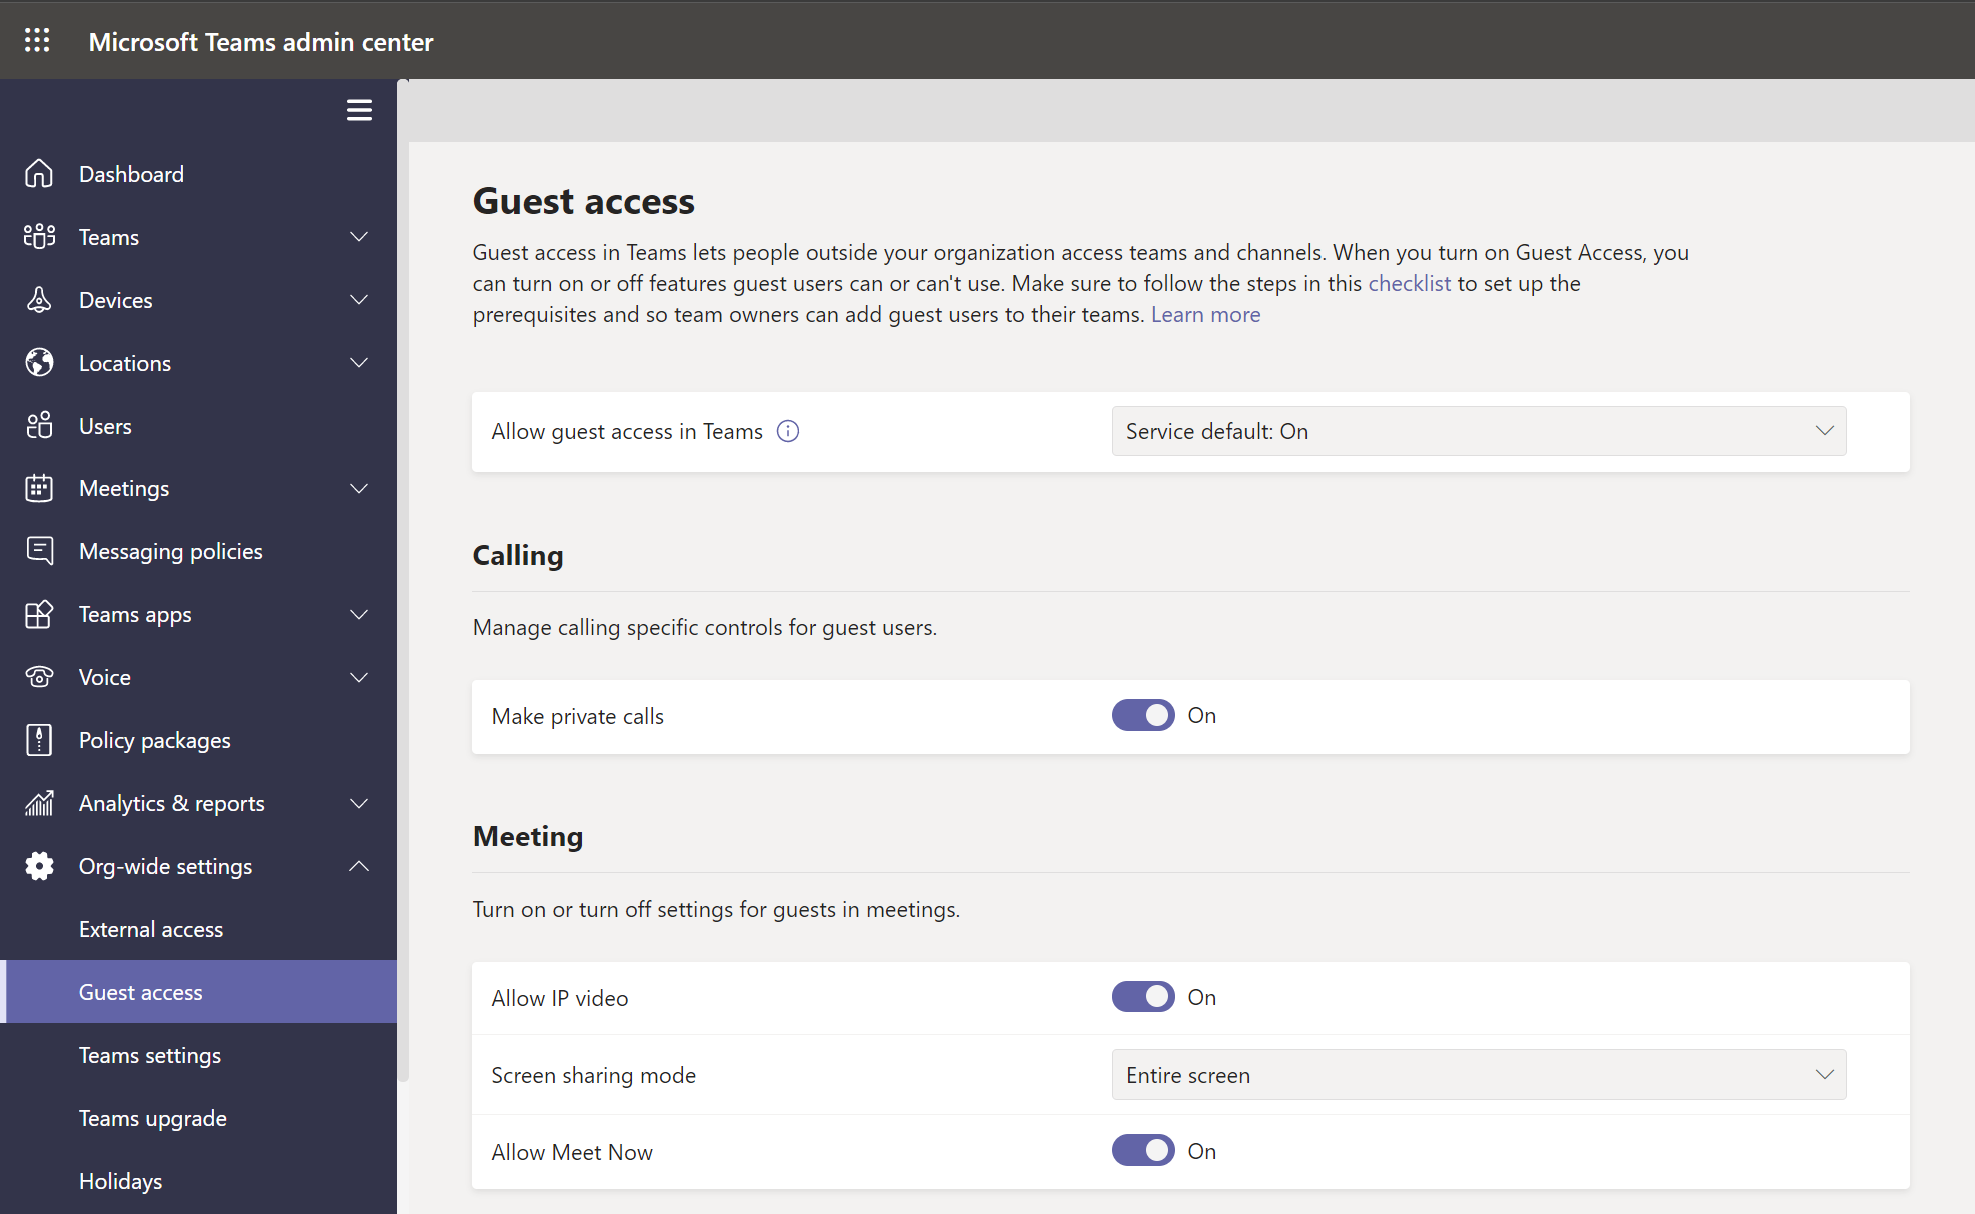 A screenshot of the Guest access page in Org-wide settings. The default values are displayed.